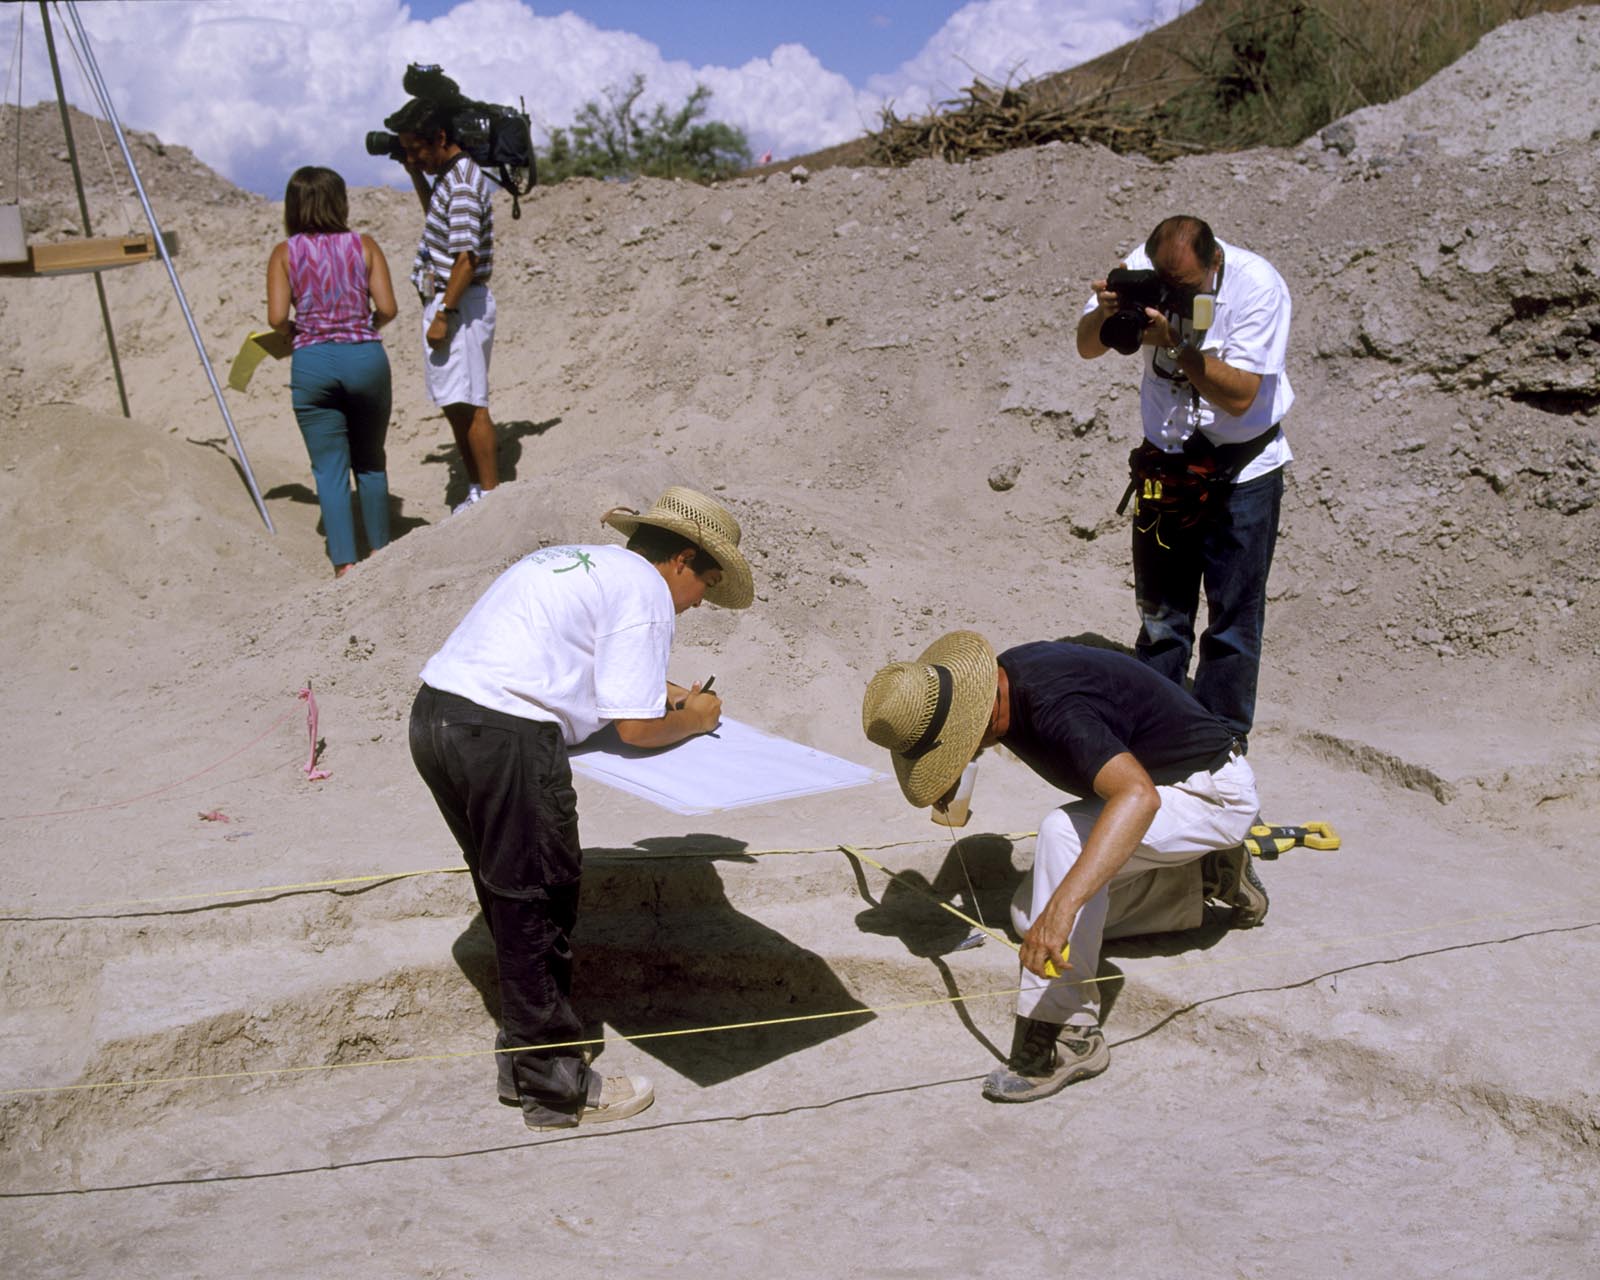 Near Lake Las Vegas, an archeological dig on an Anasazi pit house dated between 400 and 600 AD.